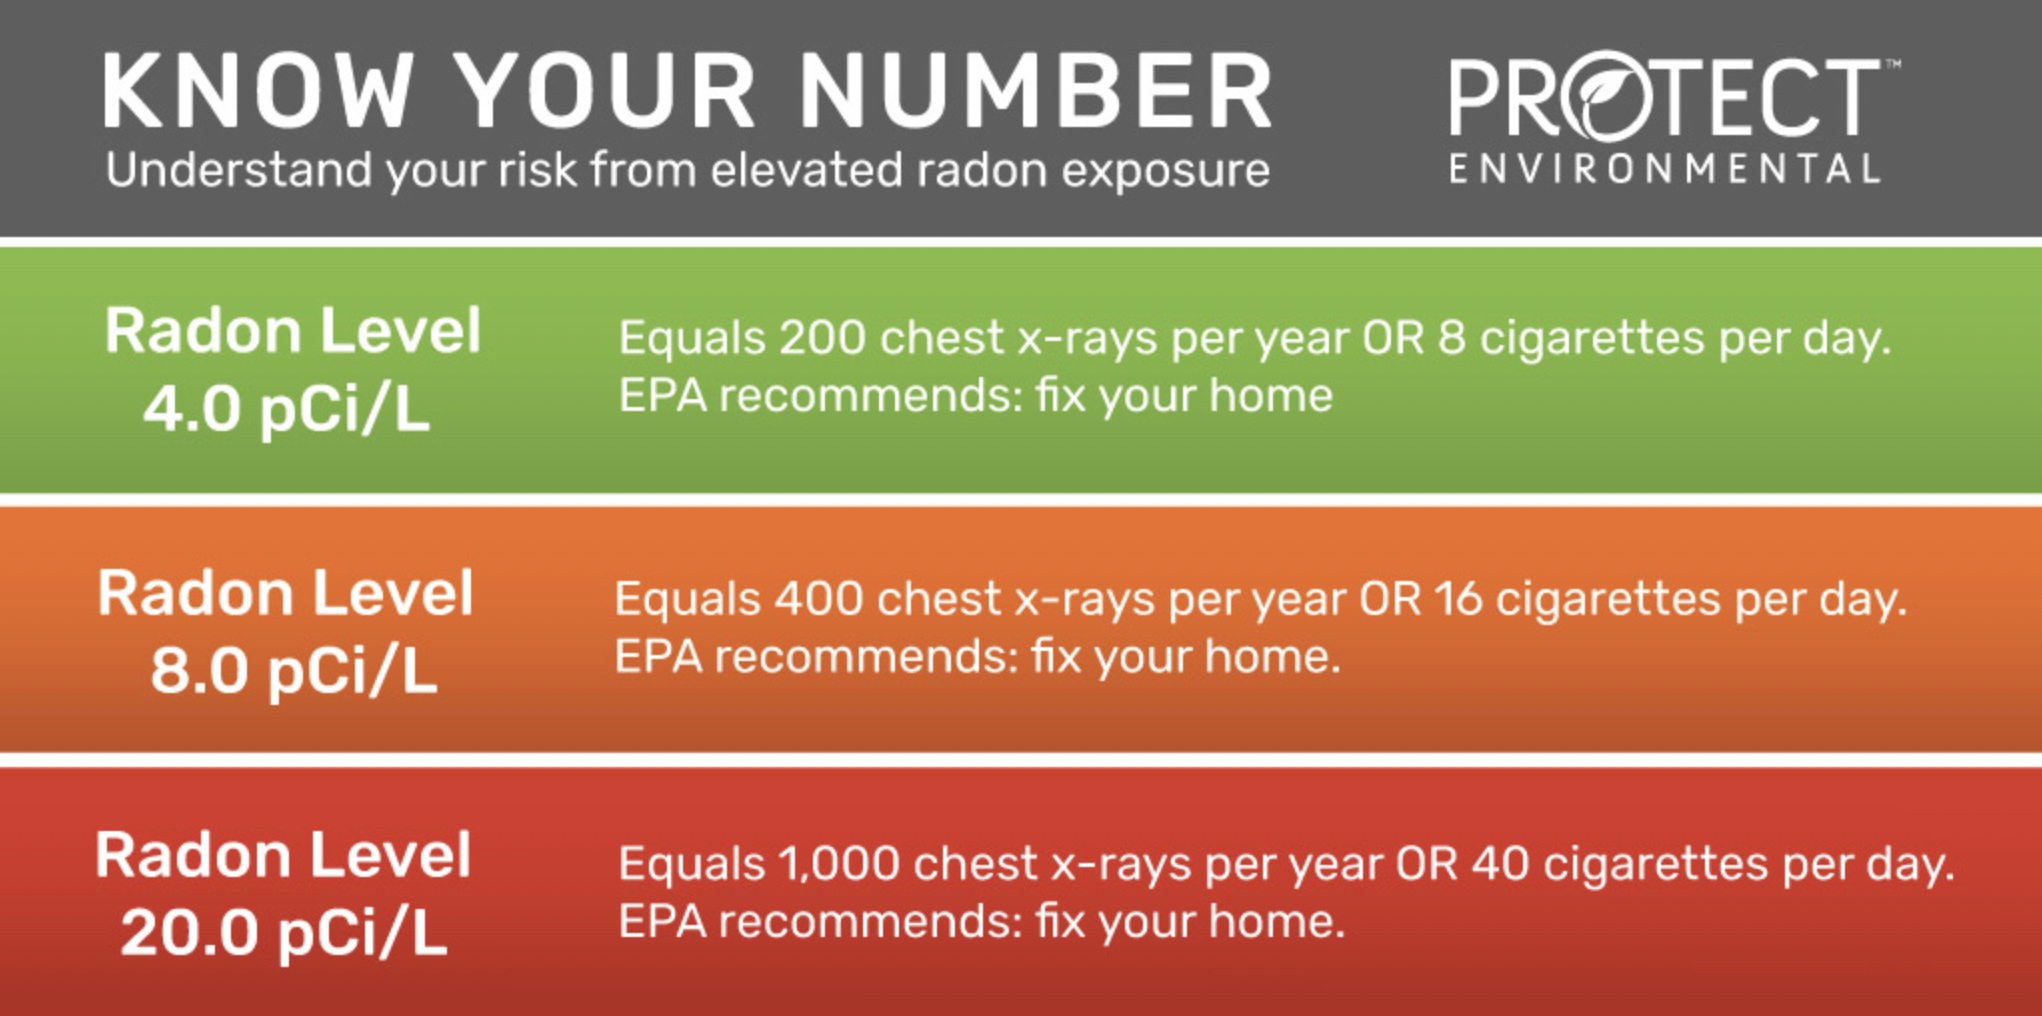 Testing for Radon is the only way to know your risk of radon-induced lung cancer.